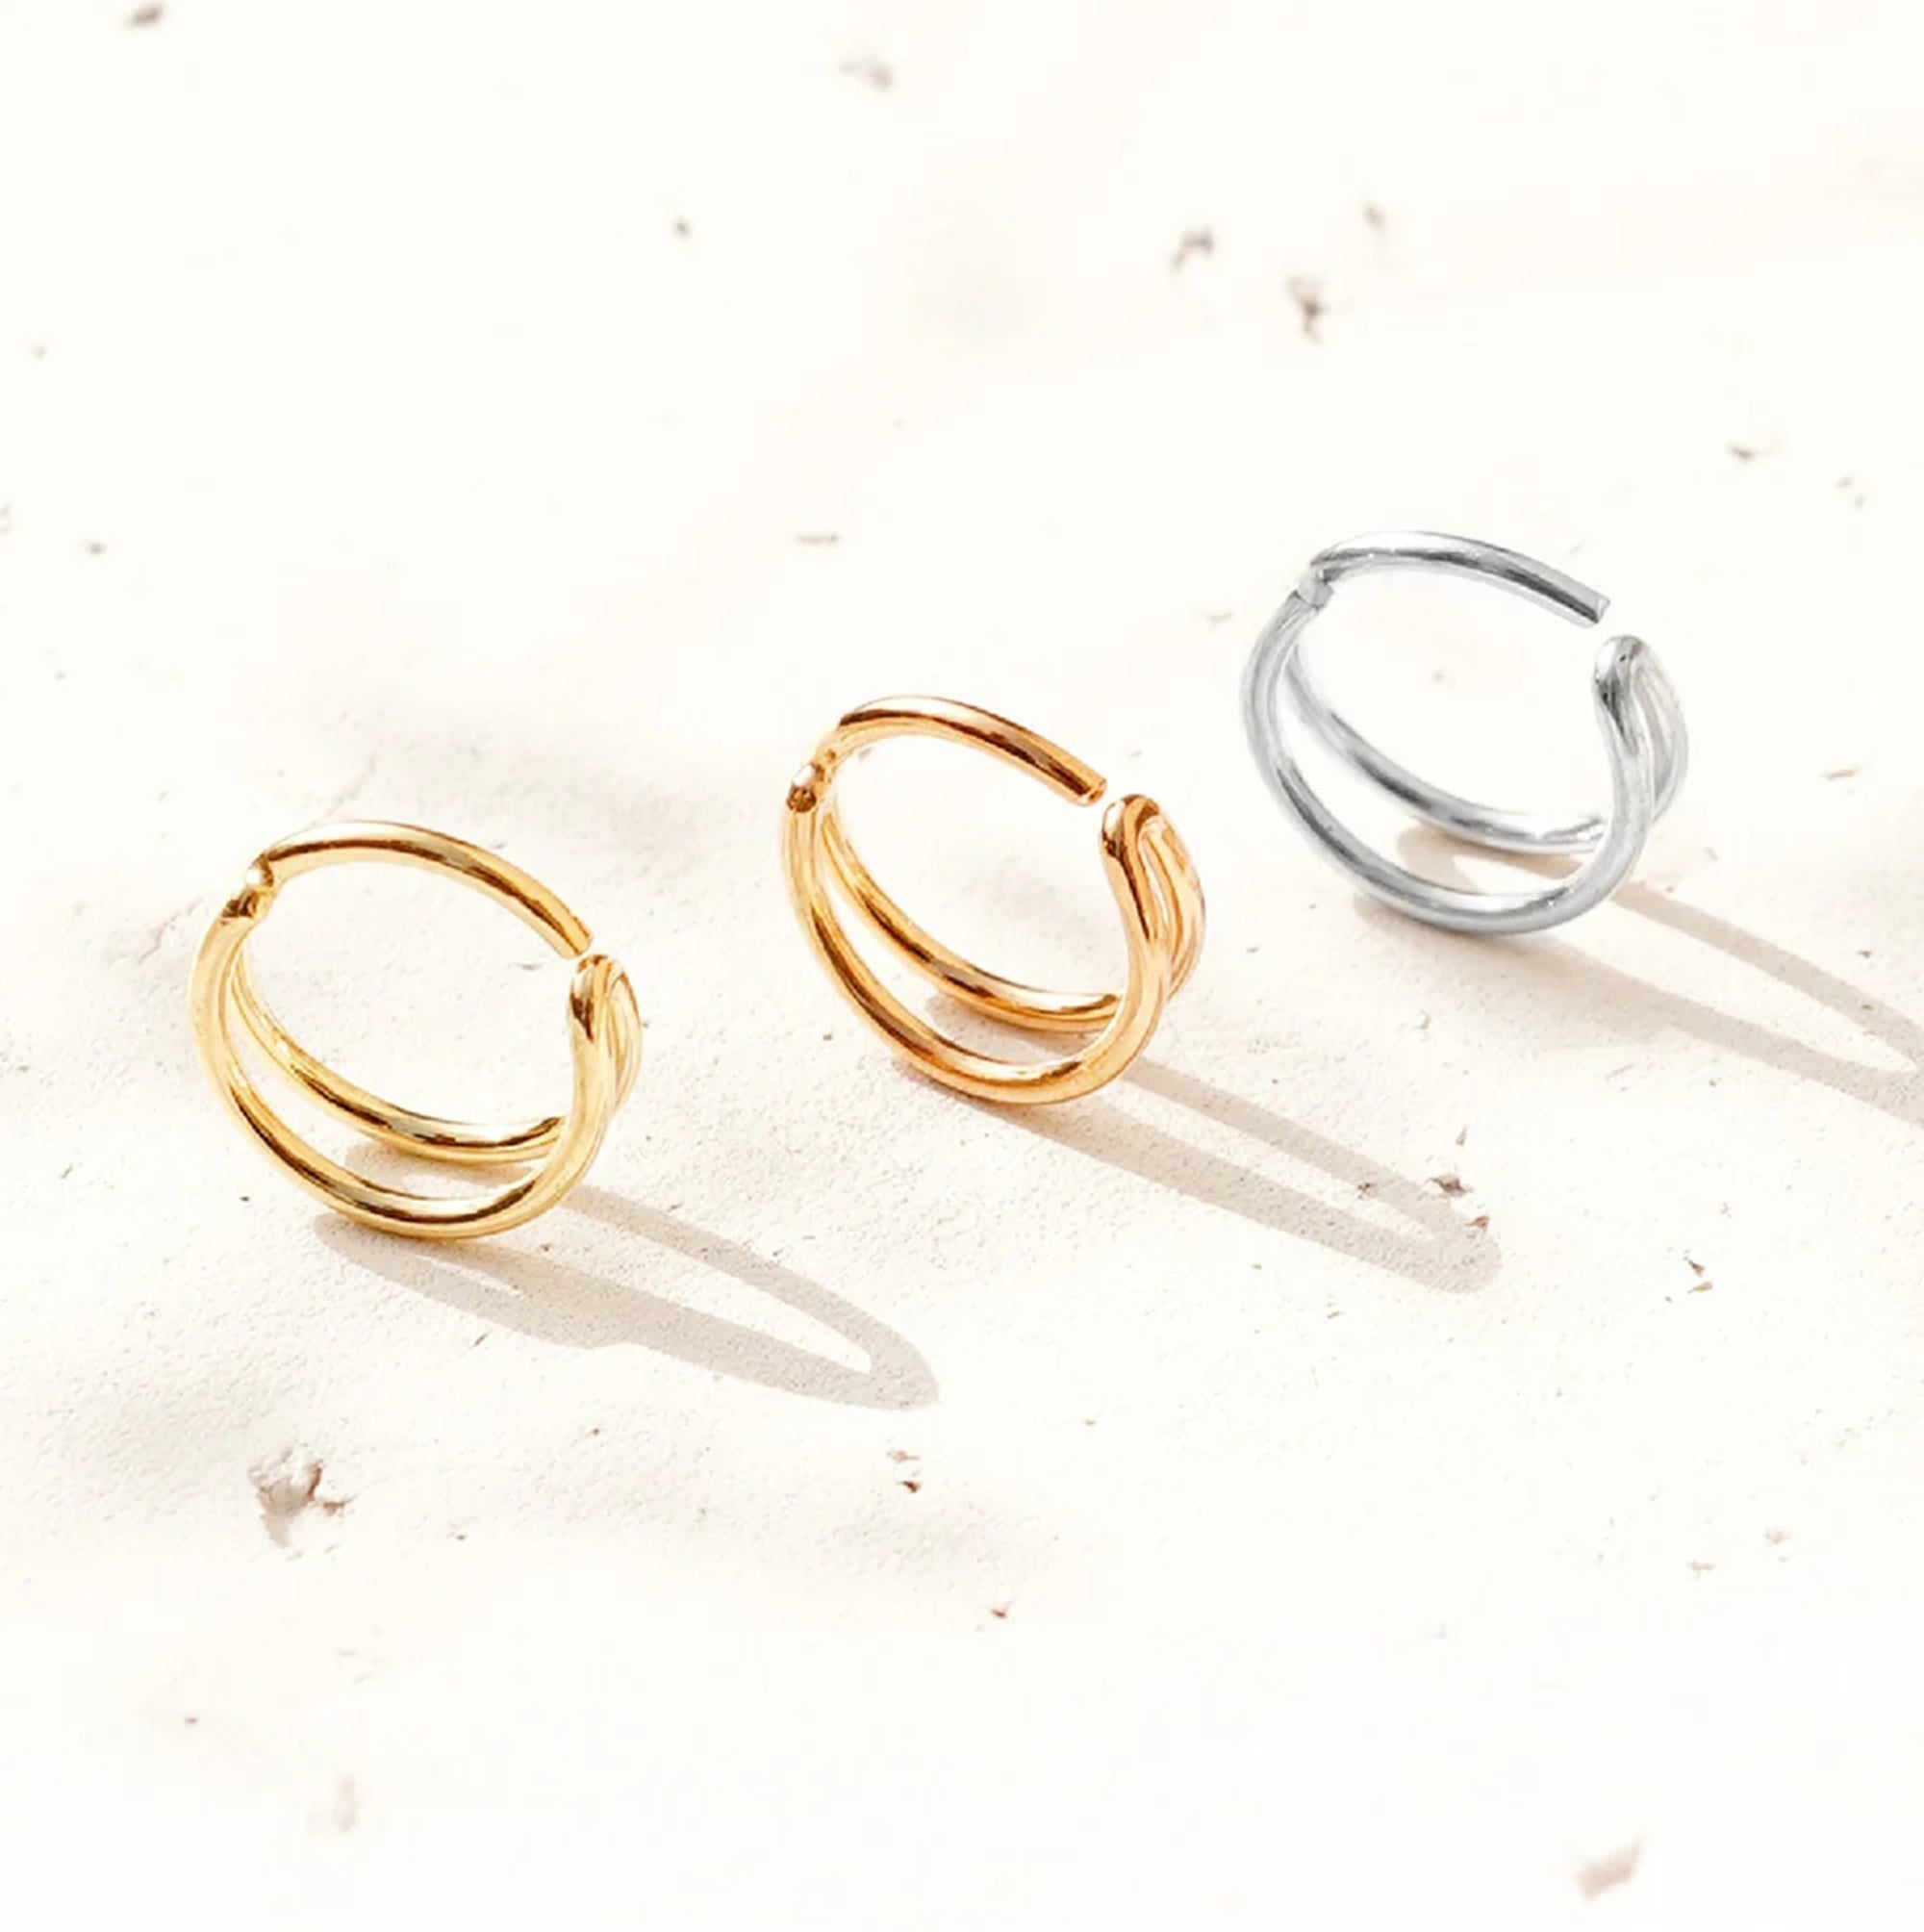 Double Hoop Tragus Earring Gold - TinyBox Jewelry